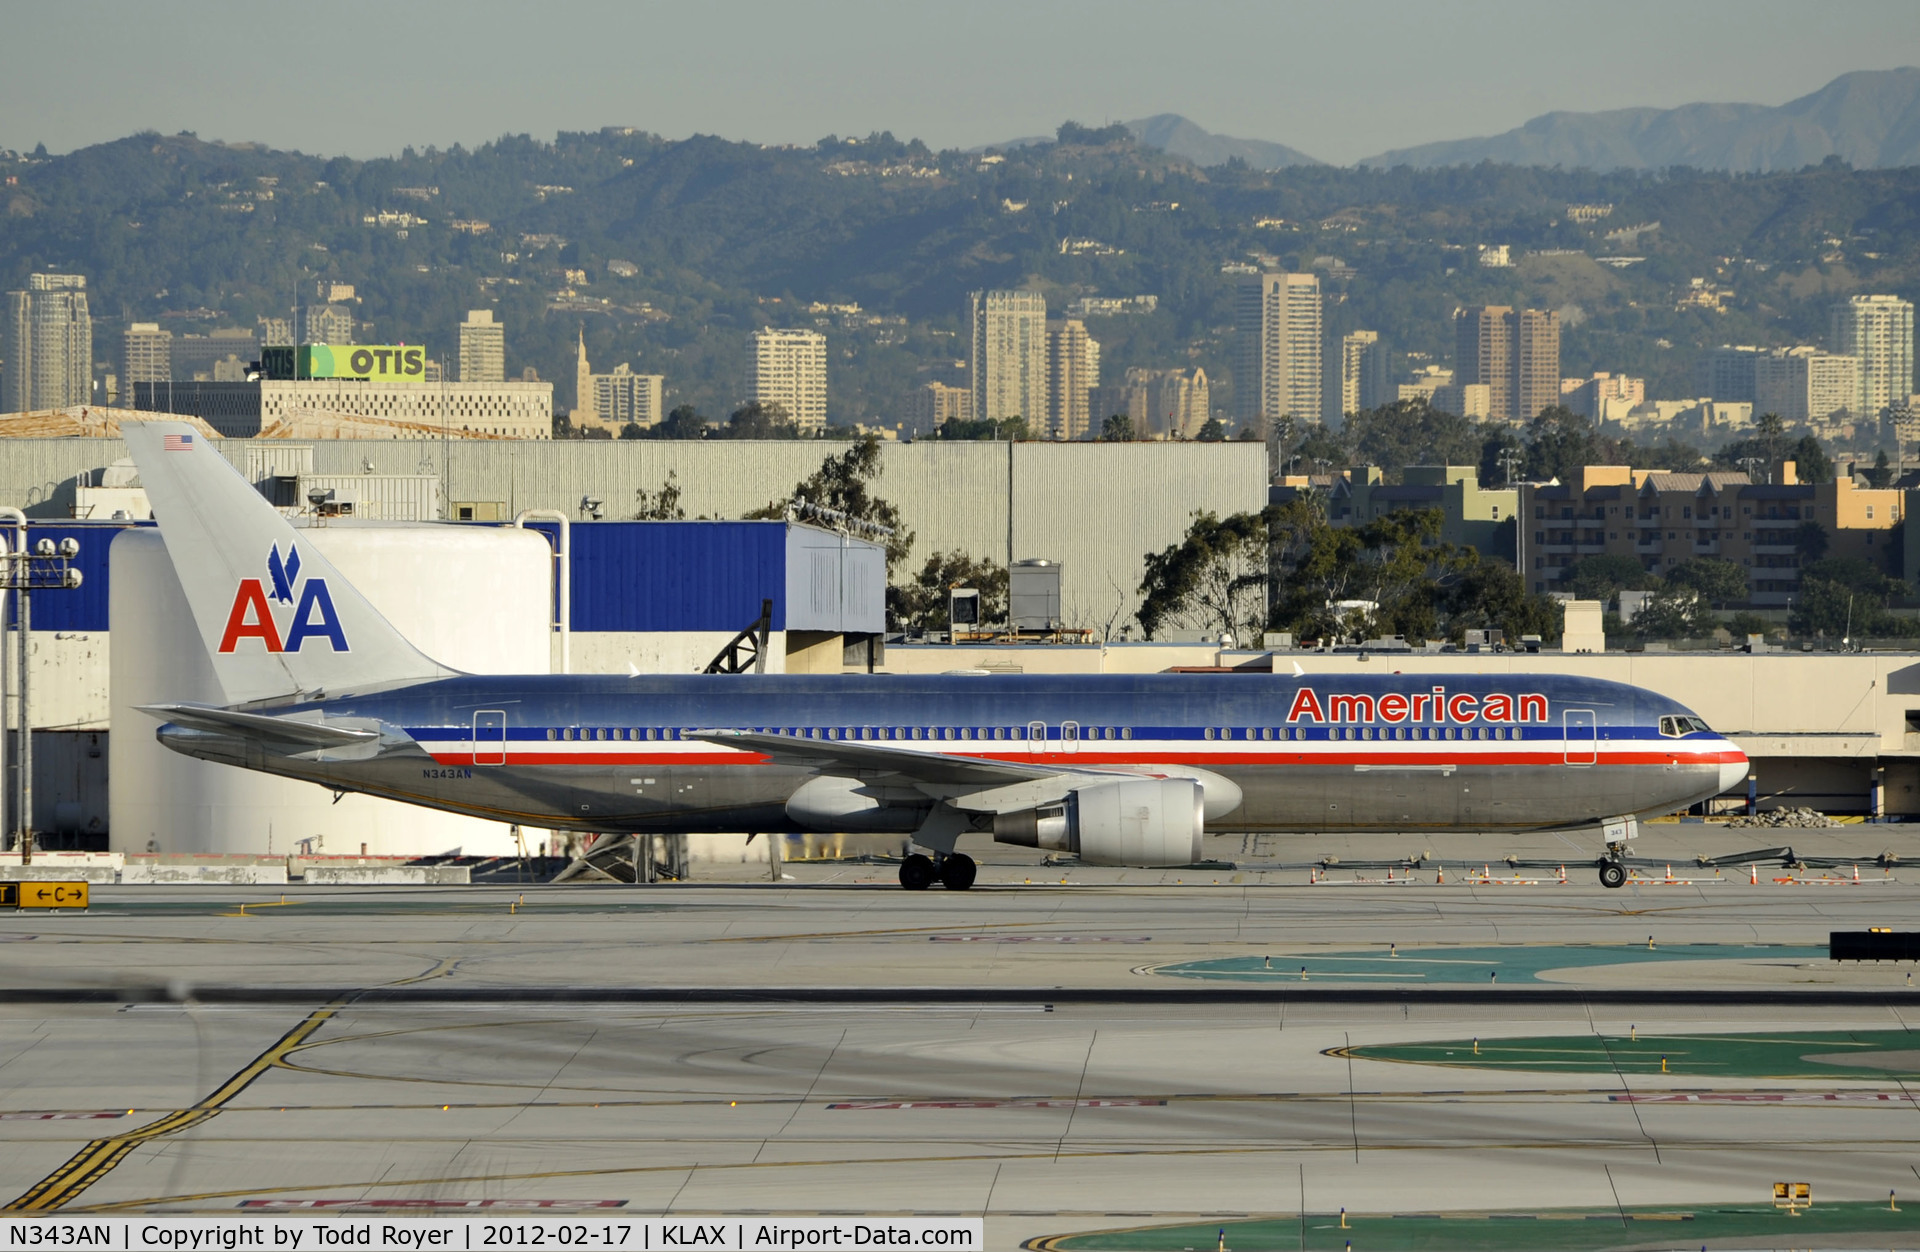 N343AN, 2003 Boeing 767-323 C/N 33082, Taxiing to gate at LAX